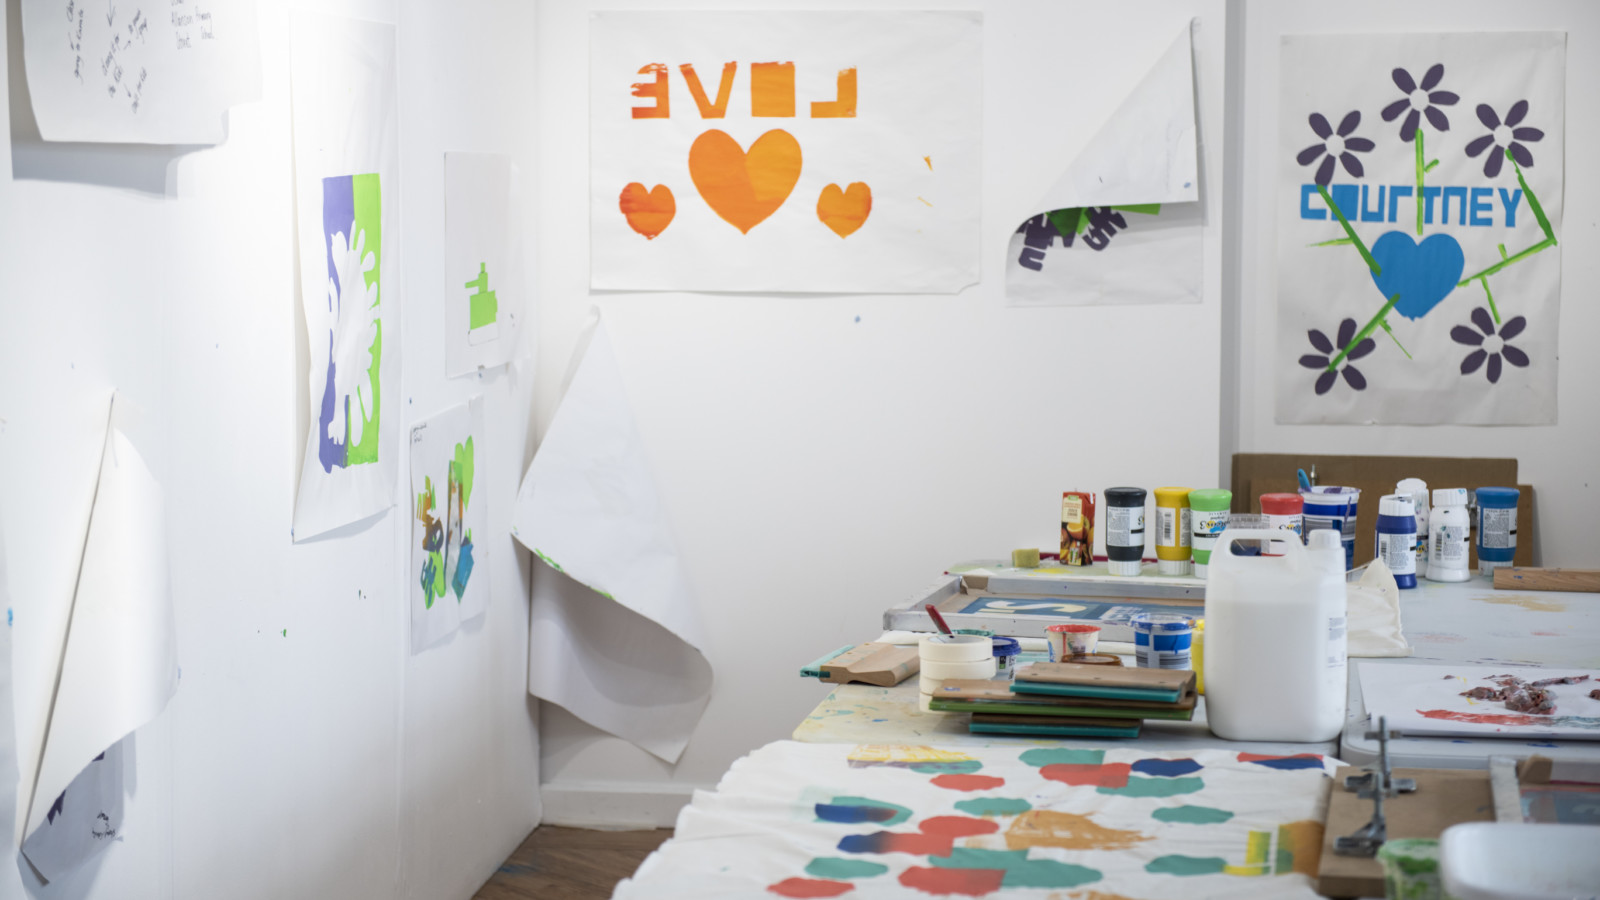 A white room has a table with lots of art supplies and paintings on. On the walls are posters with colourful paintings or hearts and flowers.